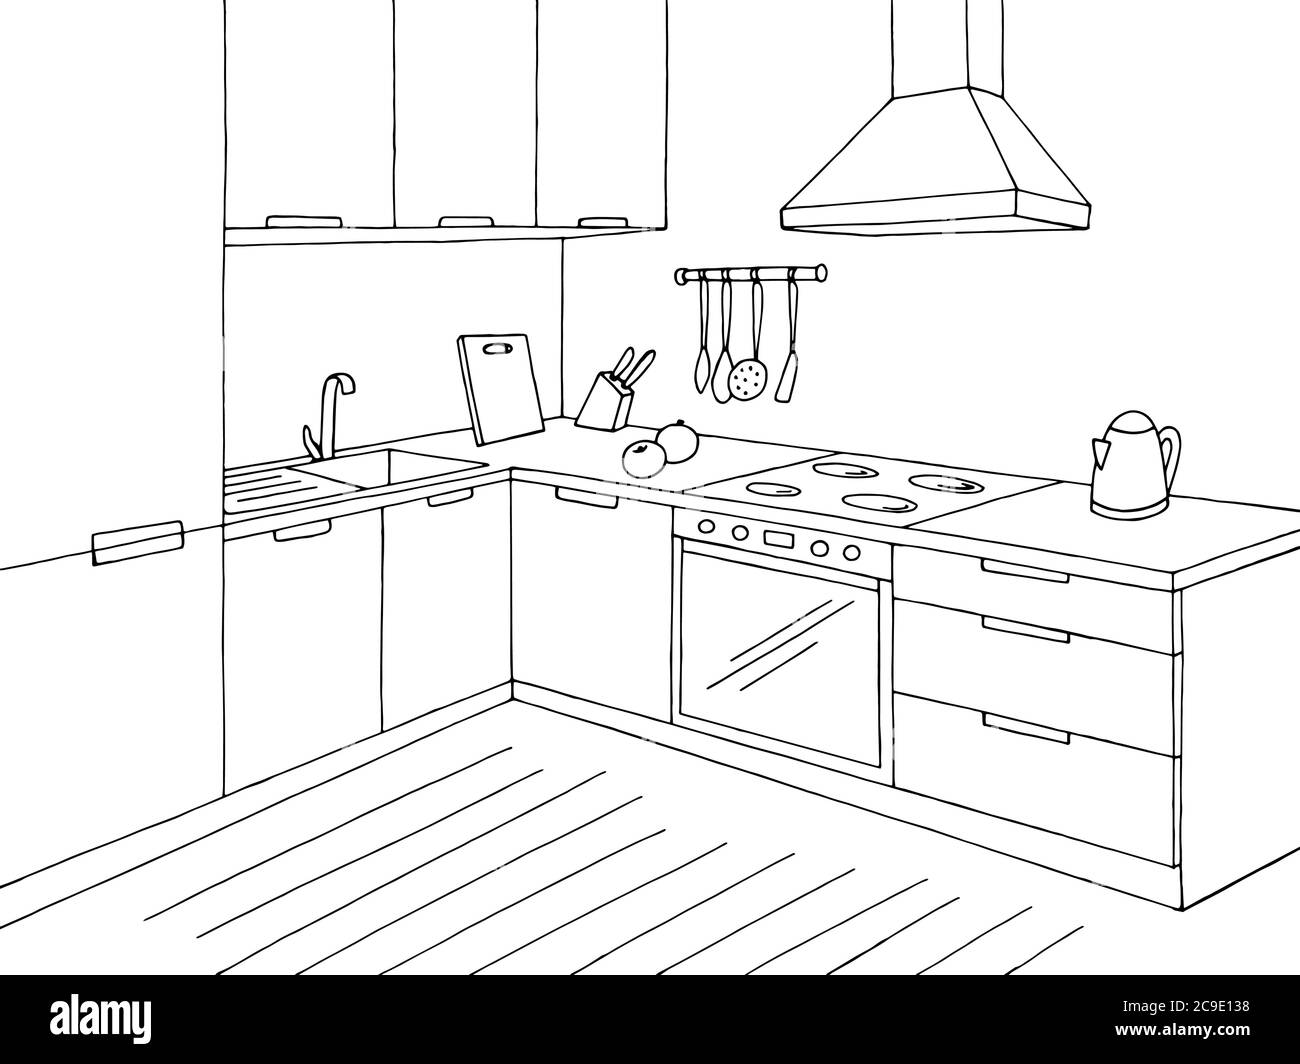 How to Draw a Kitchen in 1-Point Perspective Step by Steps for Beginners -  YouTube